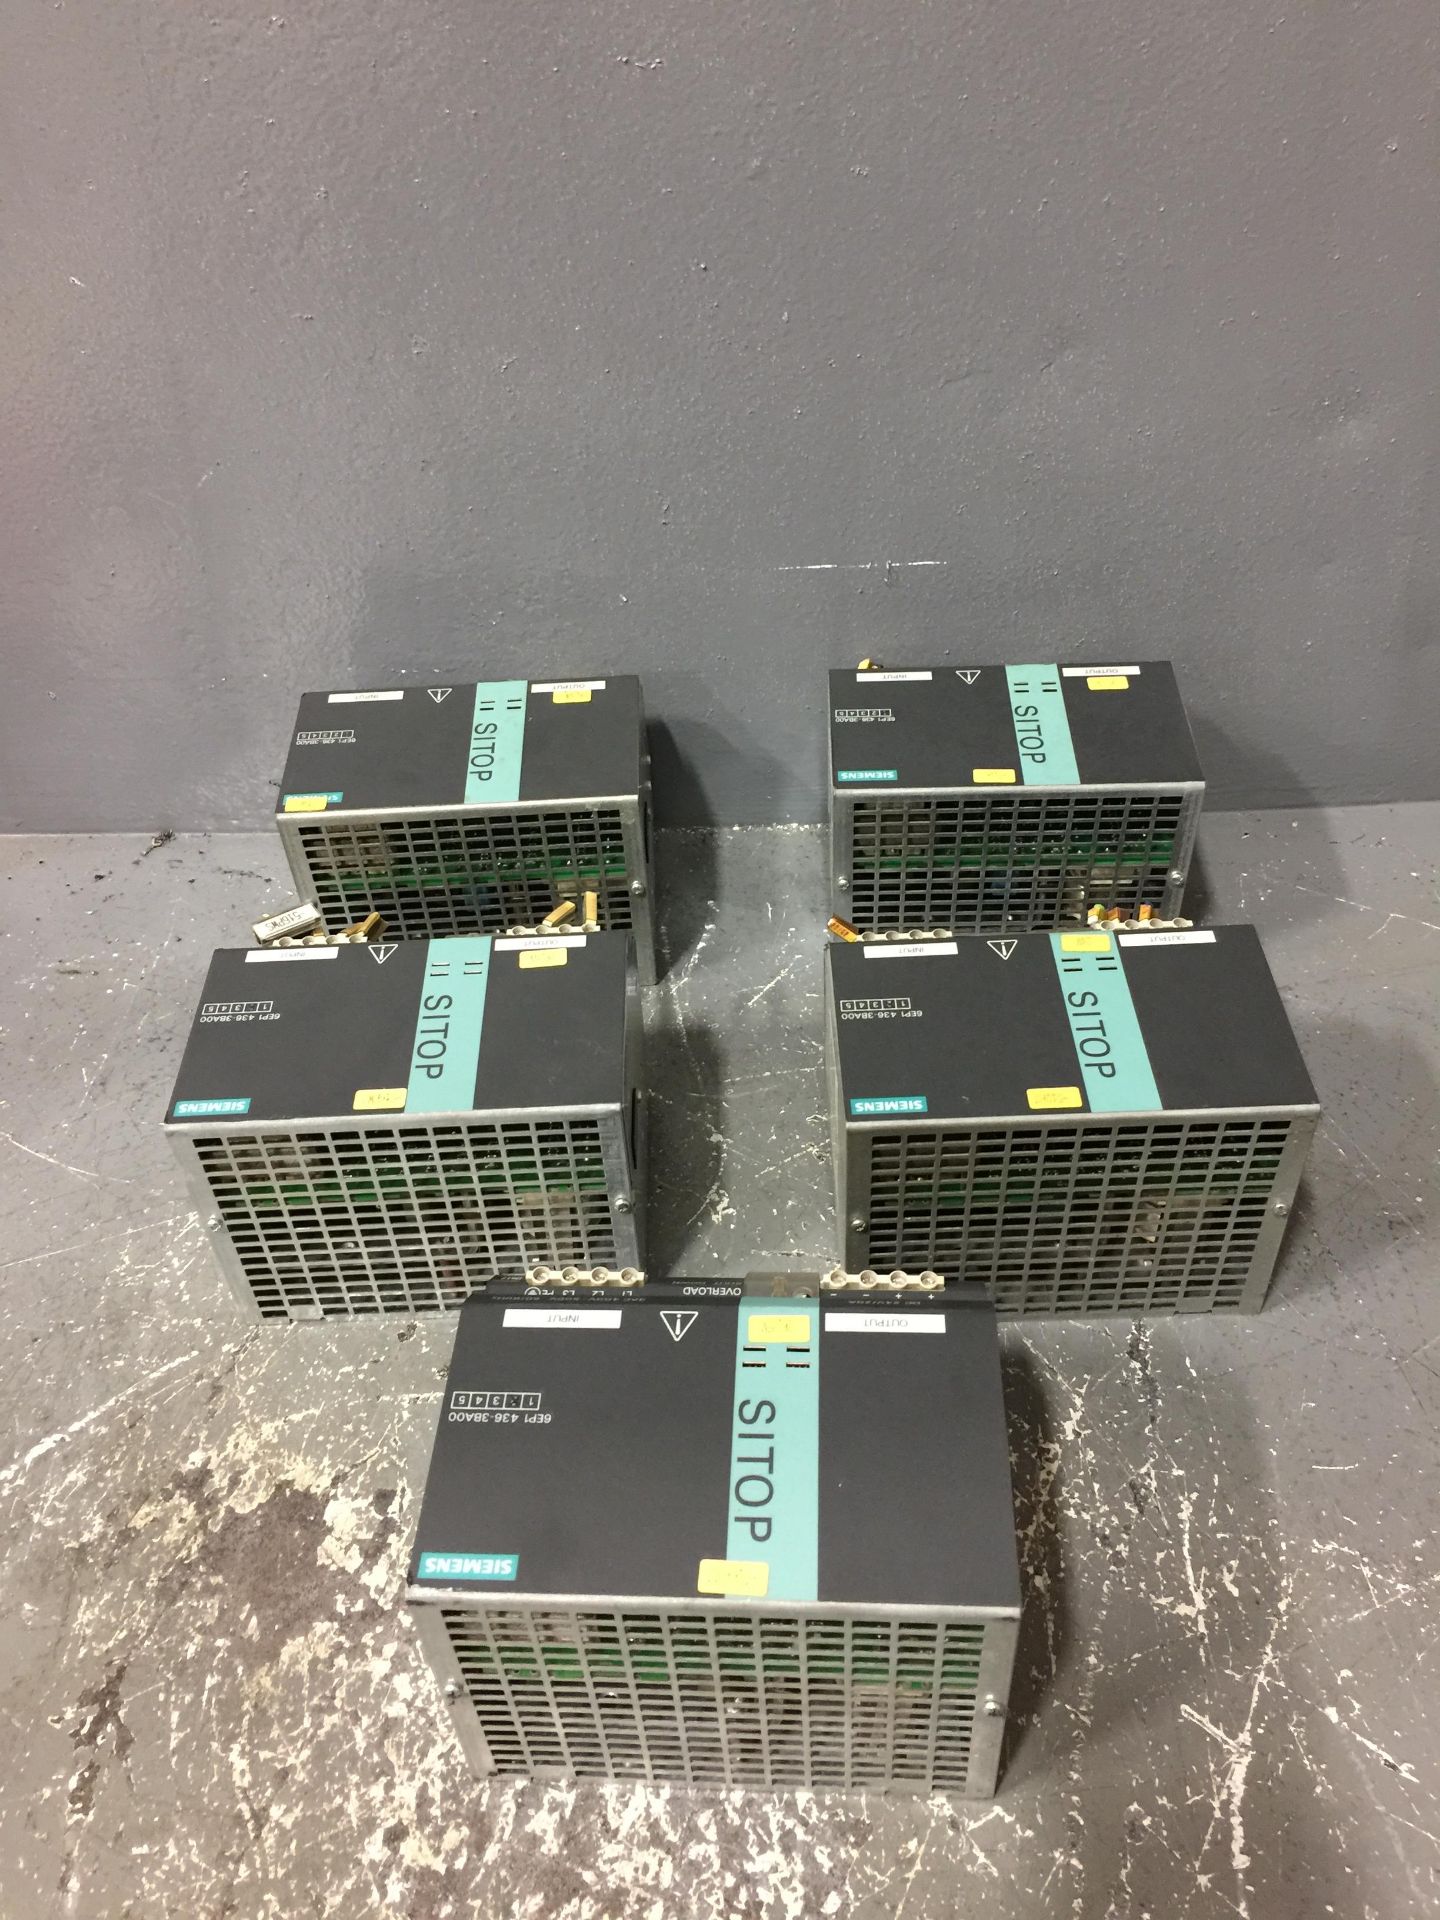 (5) - SIEMENS 6EP1436-3BA00 SITOP POWER 20_POWER SUPPLY - Image 2 of 3